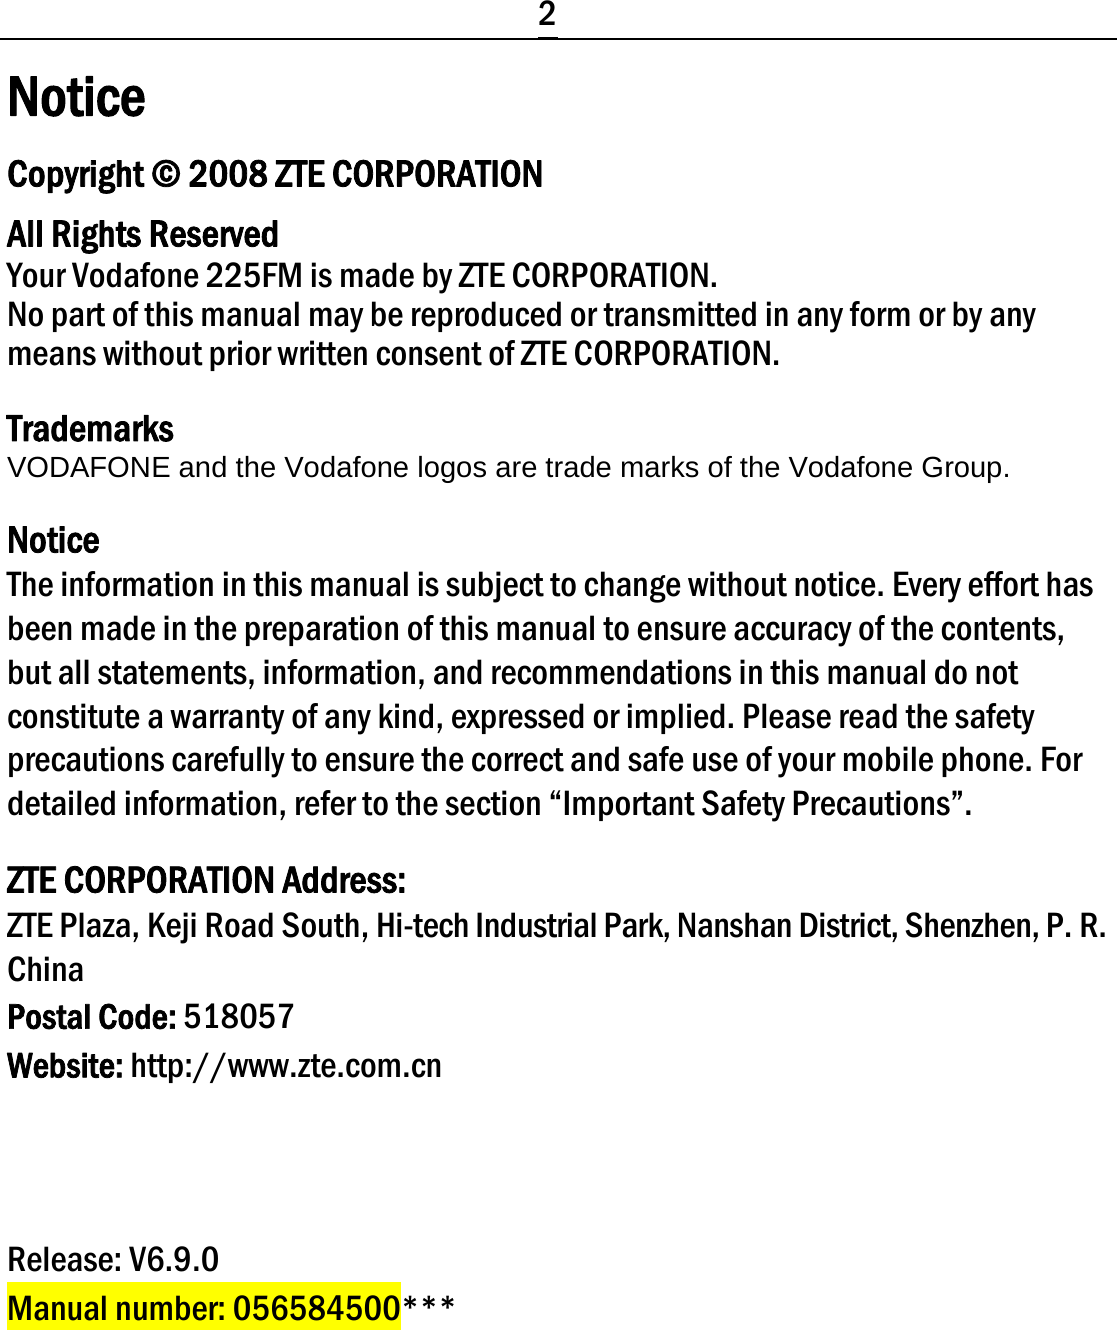  2 Notice Copyright © 2008 ZTE CORPORATION All Rights Reserved Your Vodafone 225FM is made by ZTE CORPORATION. No part of this manual may be reproduced or transmitted in any form or by any means without prior written consent of ZTE CORPORATION. Trademarks VODAFONE and the Vodafone logos are trade marks of the Vodafone Group. Notice The information in this manual is subject to change without notice. Every effort has been made in the preparation of this manual to ensure accuracy of the contents, but all statements, information, and recommendations in this manual do not constitute a warranty of any kind, expressed or implied. Please read the safety precautions carefully to ensure the correct and safe use of your mobile phone. For detailed information, refer to the section “Important Safety Precautions”. ZTE CORPORATION Address: ZTE Plaza, Keji Road South, Hi-tech Industrial Park, Nanshan District, Shenzhen, P. R. China Postal Code: 518057 Website: http://www.zte.com.cn    Release: V6.9.0 Manual number: 056584500*** 